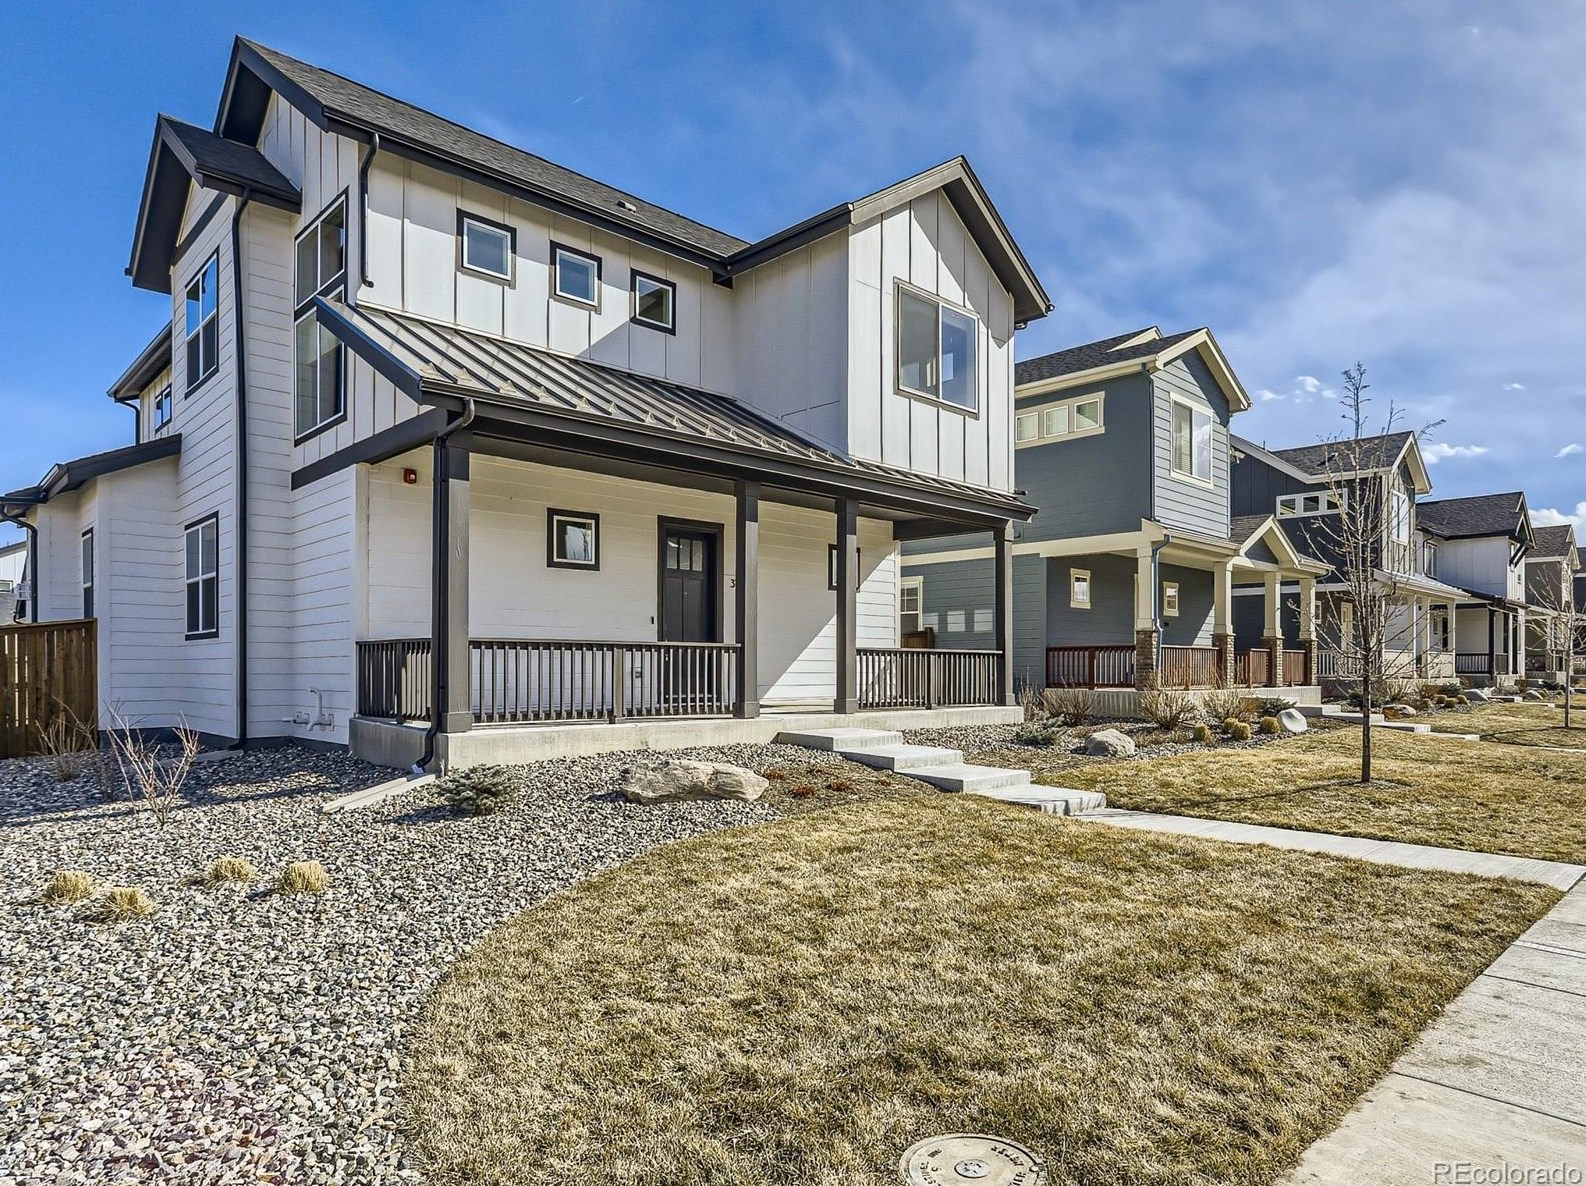 302 2nd Ave, Westminster, CO 80027-2356